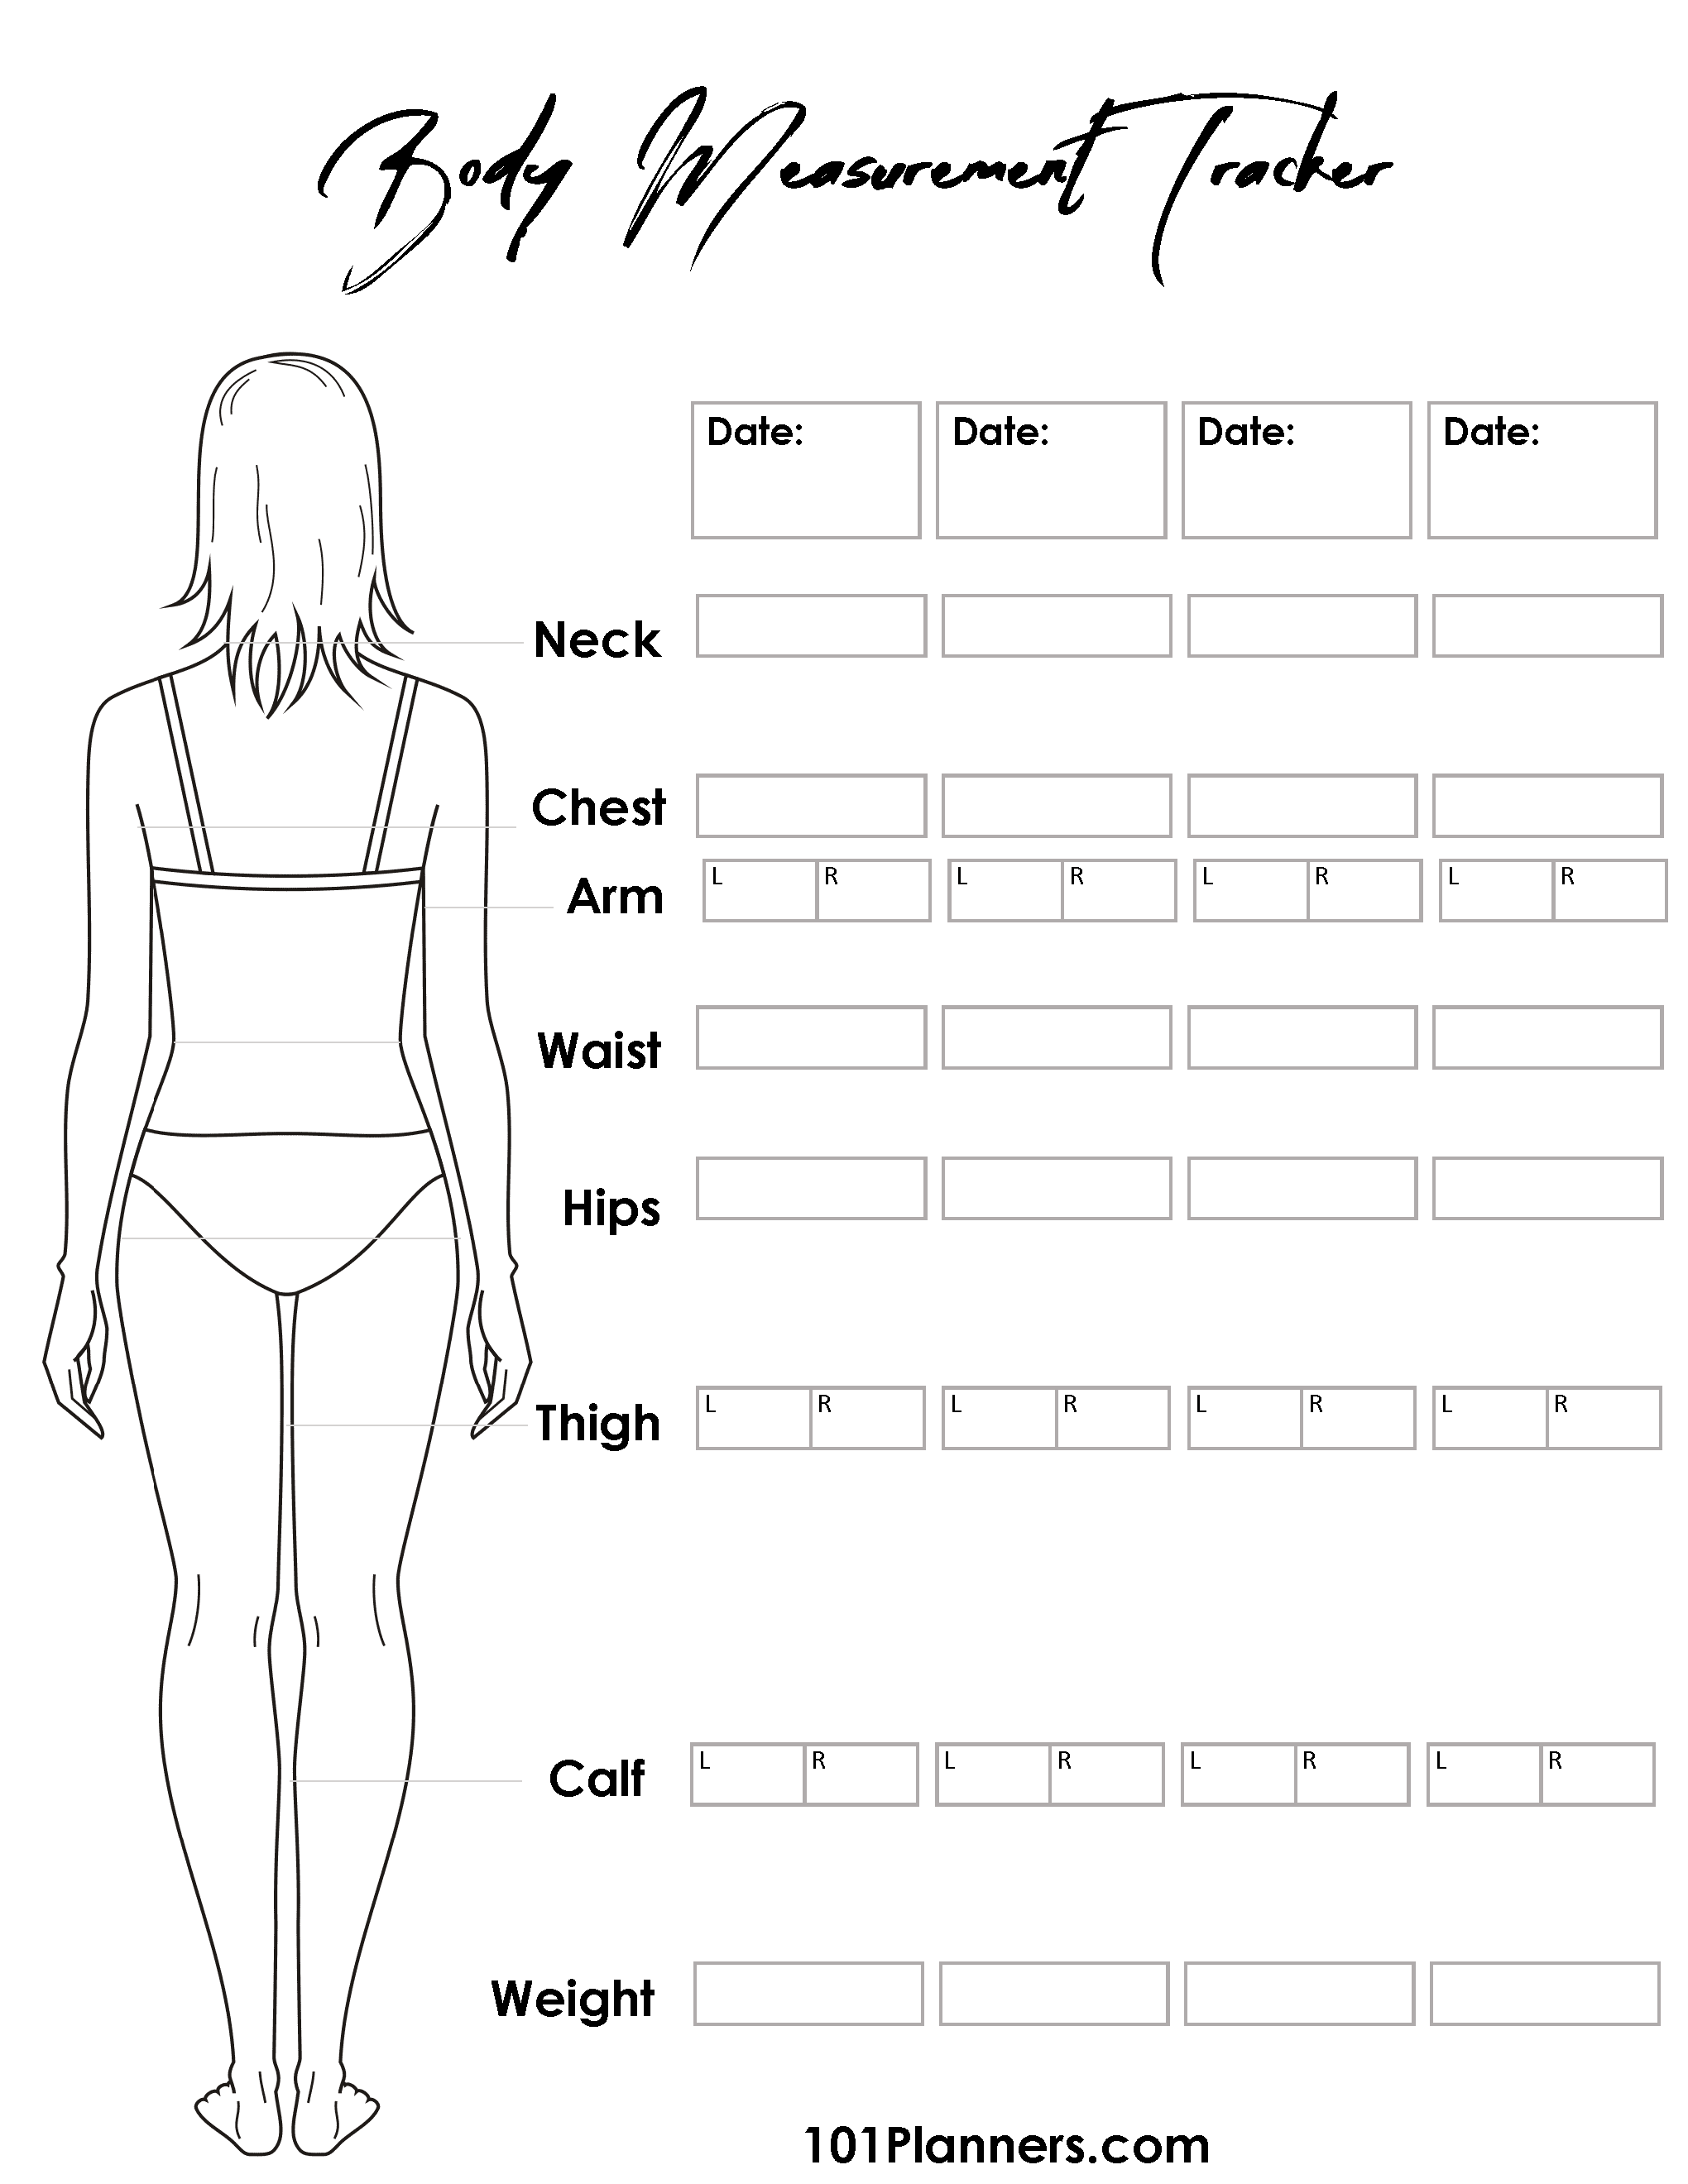 Free Printable Body Measurement Chart For Female in PDF, PNG and JPG  Formats · InkPx